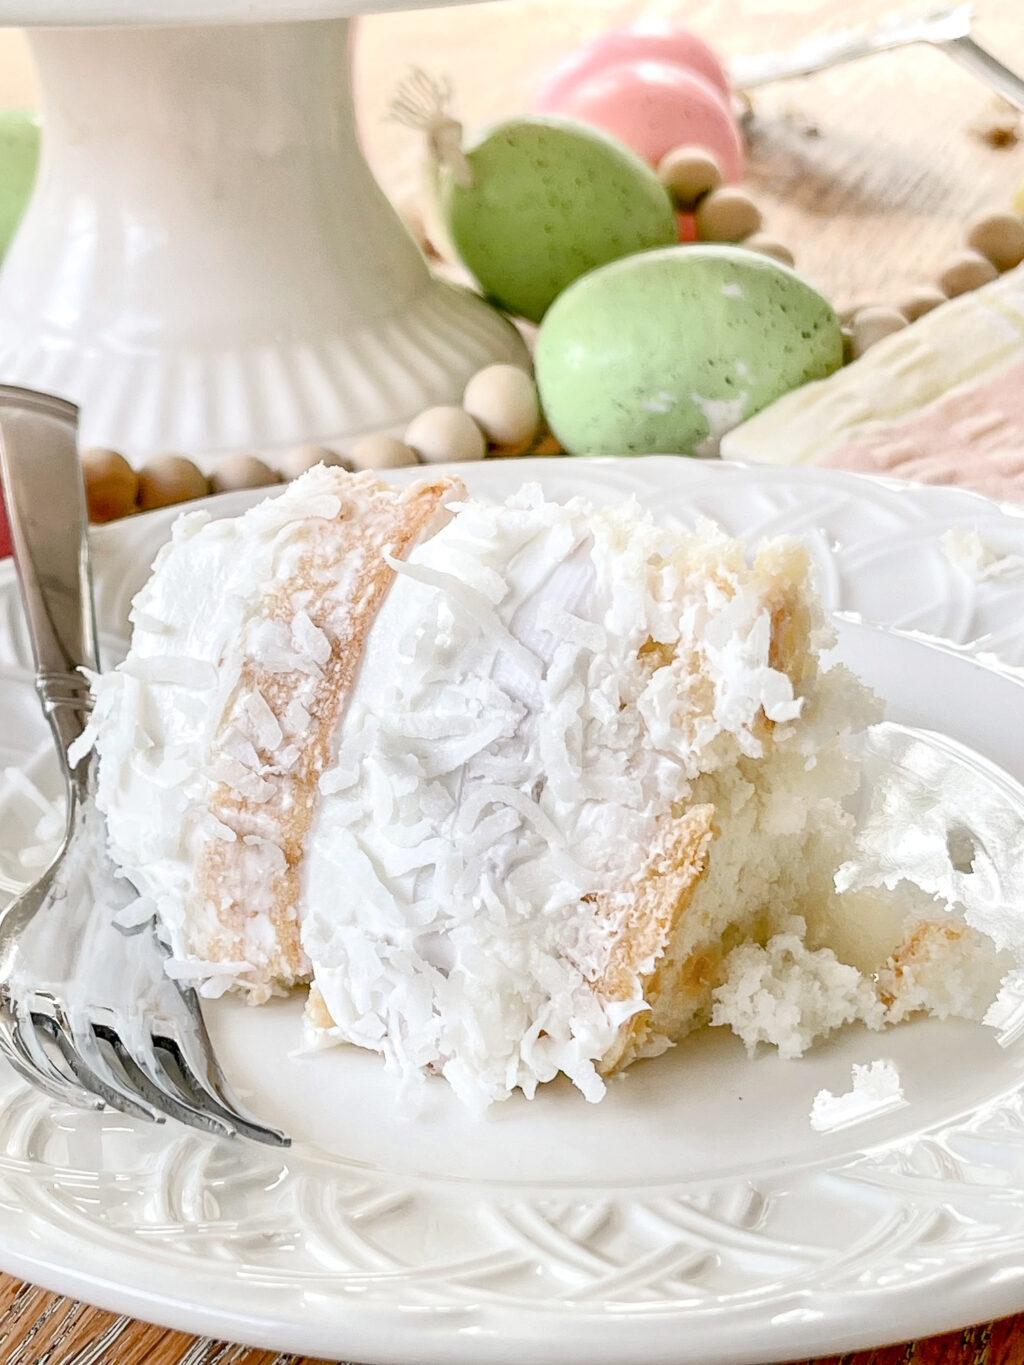 slice of coconut cake on a white plate